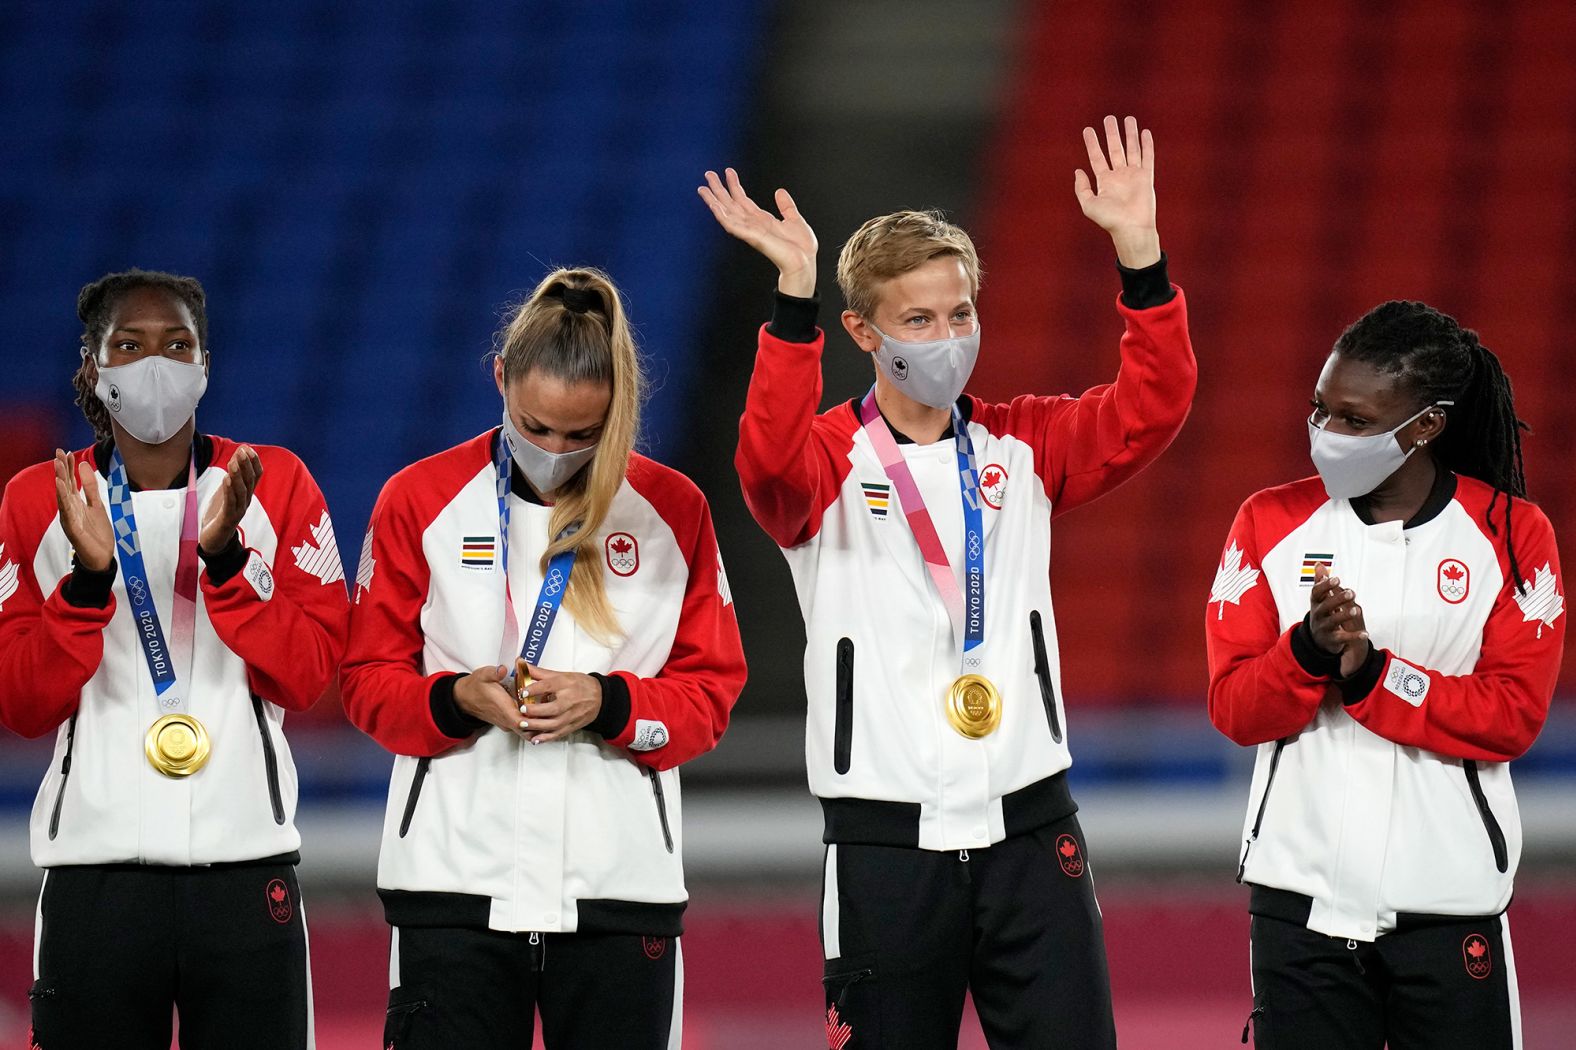 Canadian footballer Quinn waves during a medal ceremony in Yokohama, Japan. Quinn, who goes by just the one name, is <a href="index.php?page=&url=https%3A%2F%2Fwww.cnn.com%2F2021%2F08%2F05%2Fsport%2Fquinn-canada-sweden-spt-intl%2Findex.html" target="_blank">the first trans and the first nonbinary athlete to win a Olympic medal.</a>